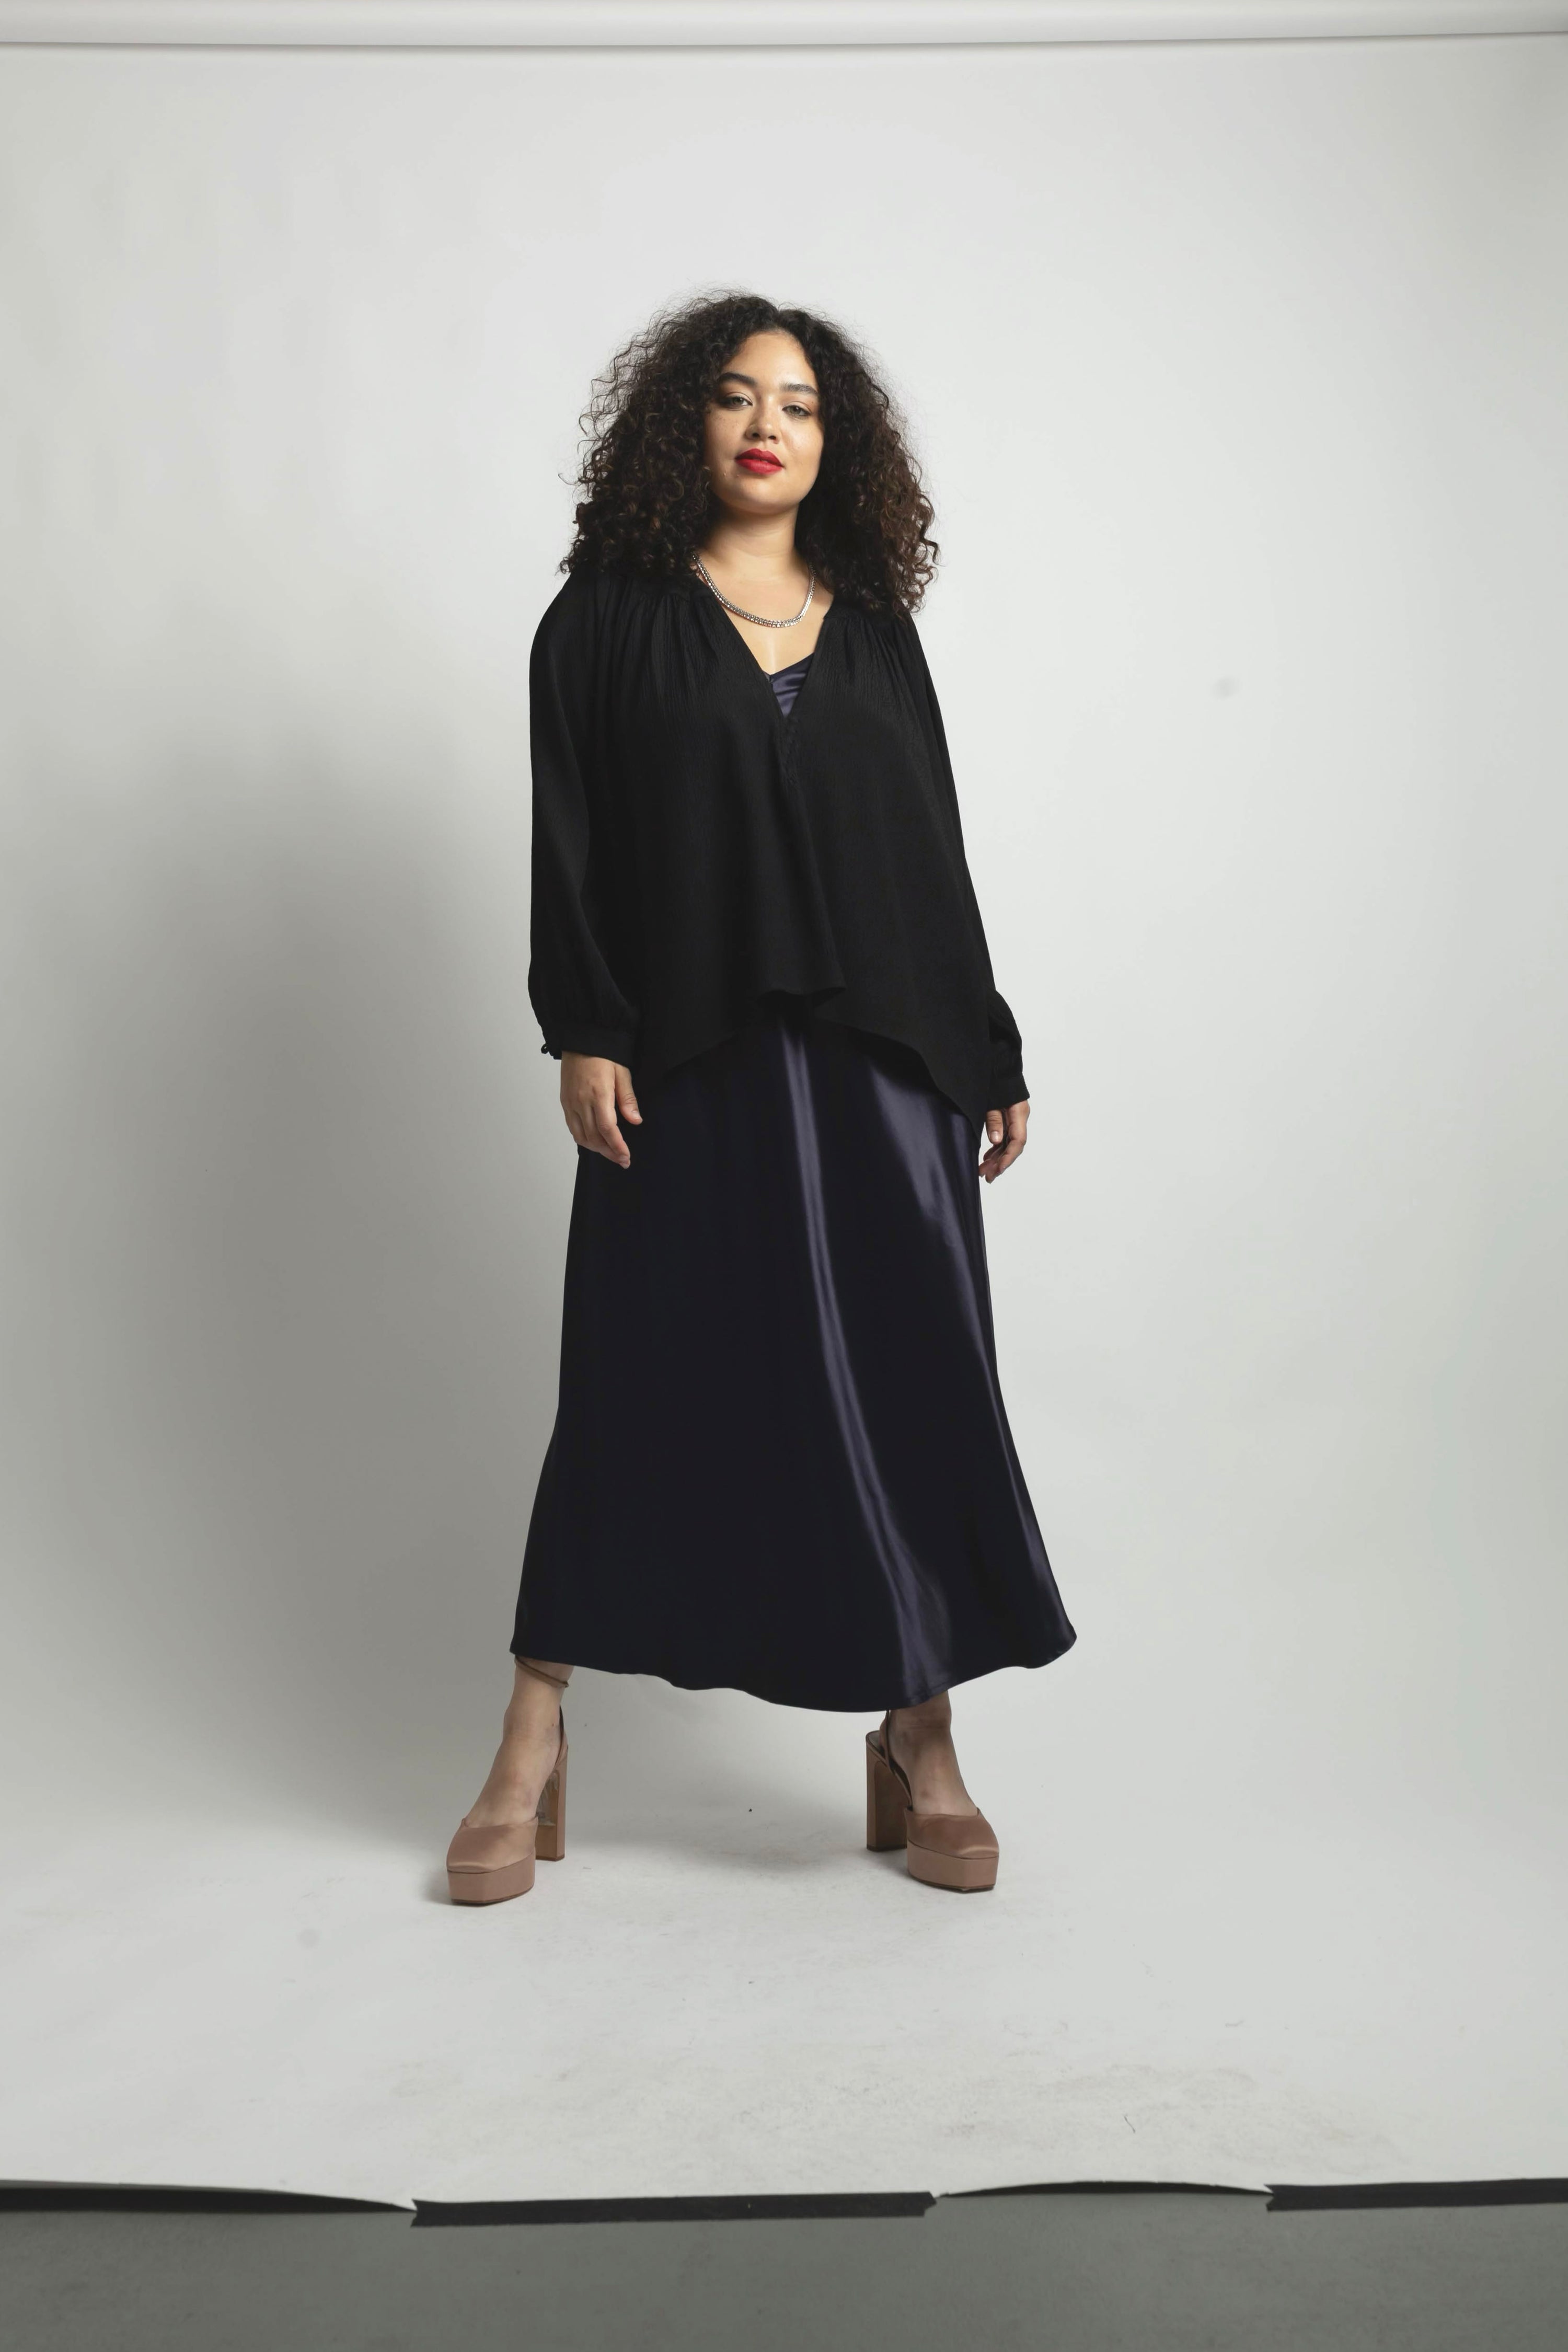 Plus size model wearing textured Stevie top